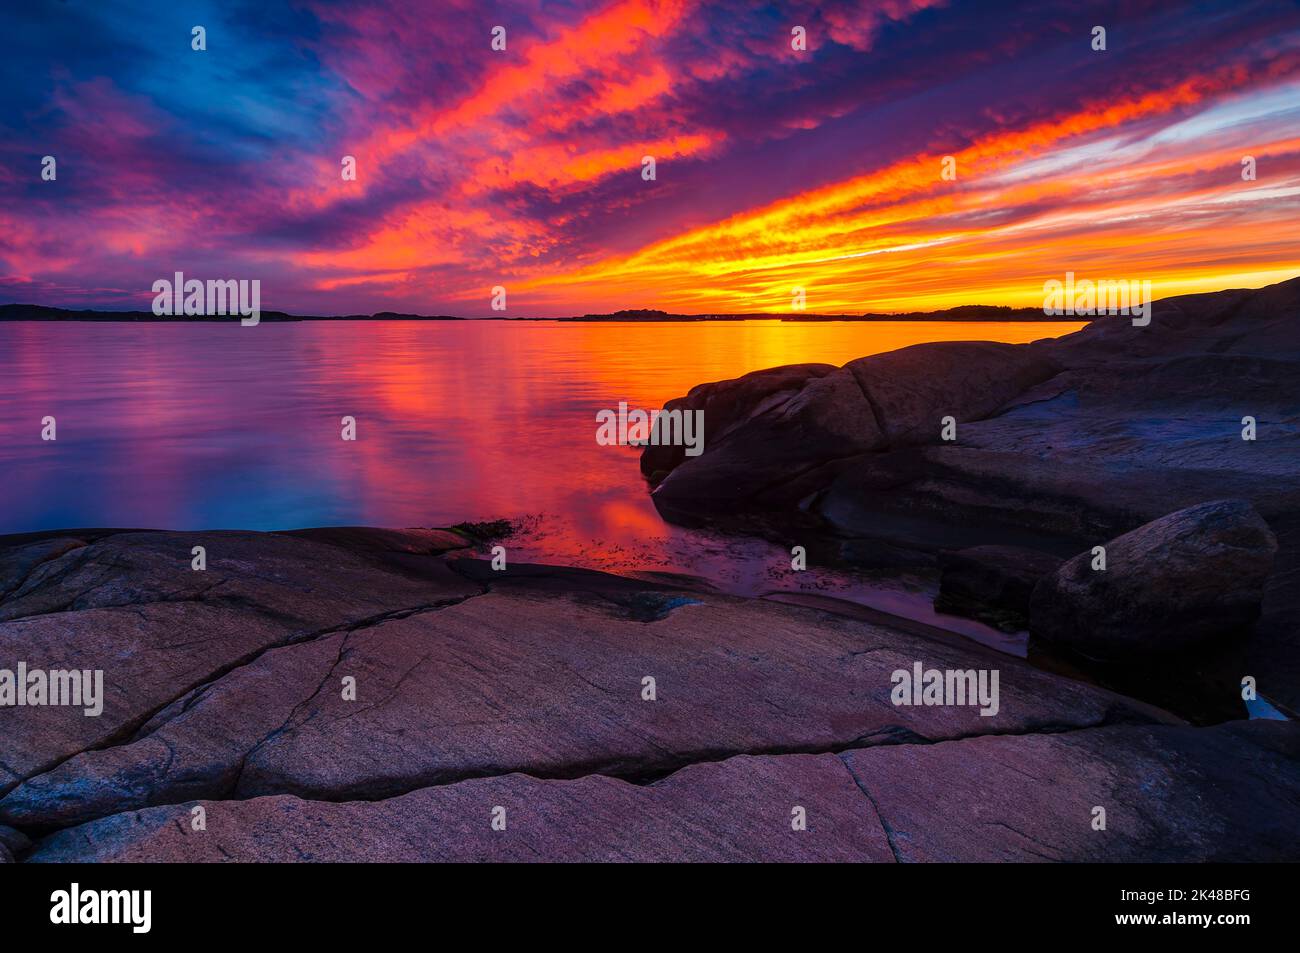 A beautiful view of rocky coastline at sunset with a colorful sky Stock Photo